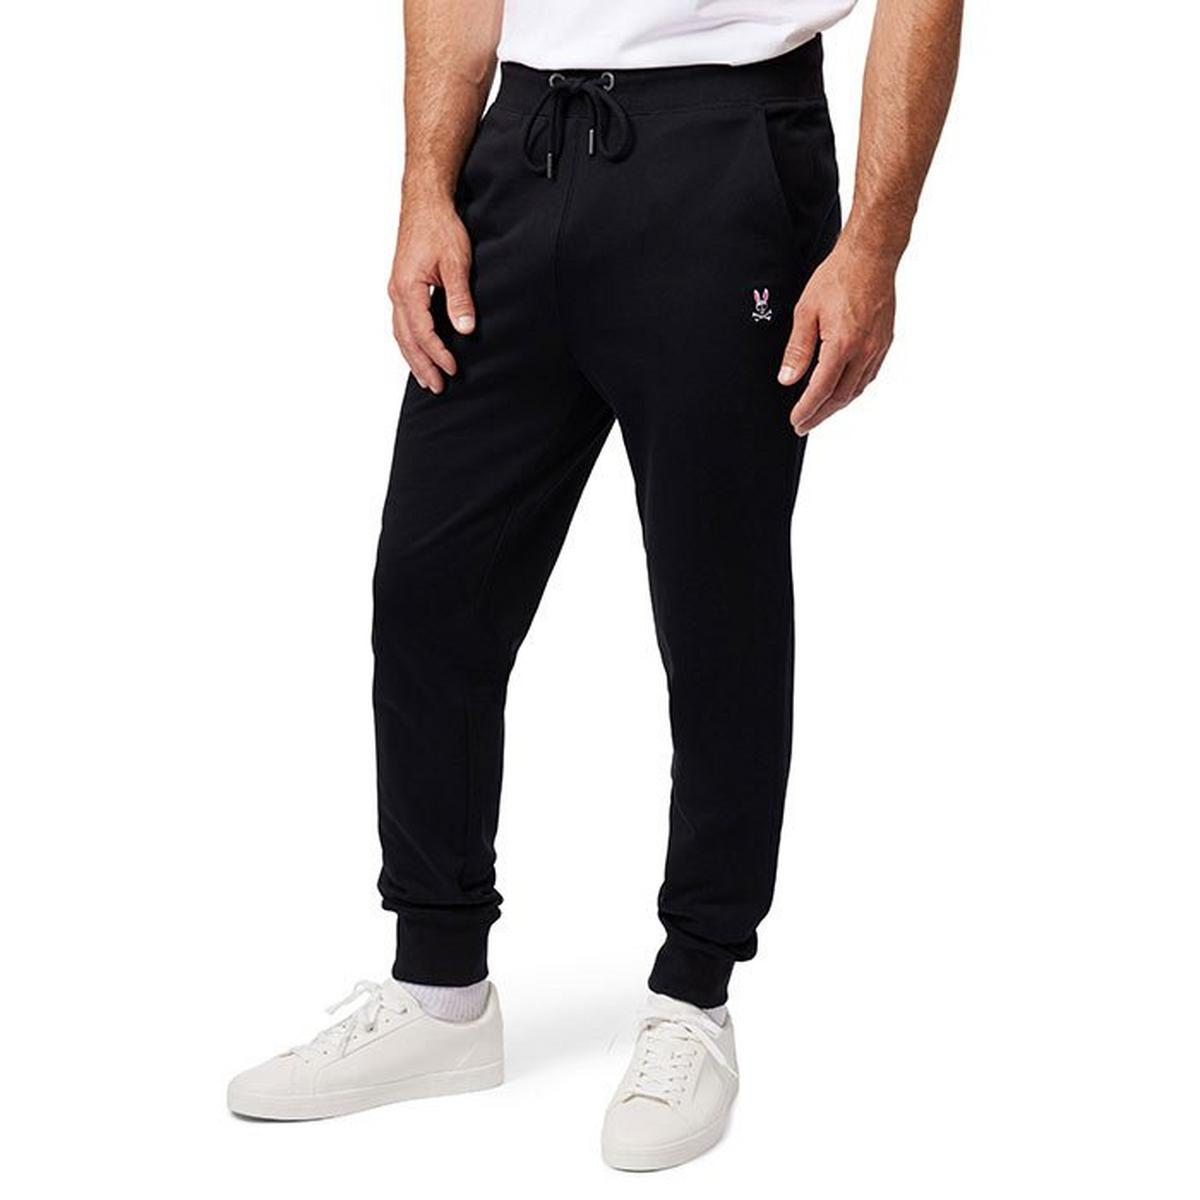 Men's French Terry Knit Jogger Pant